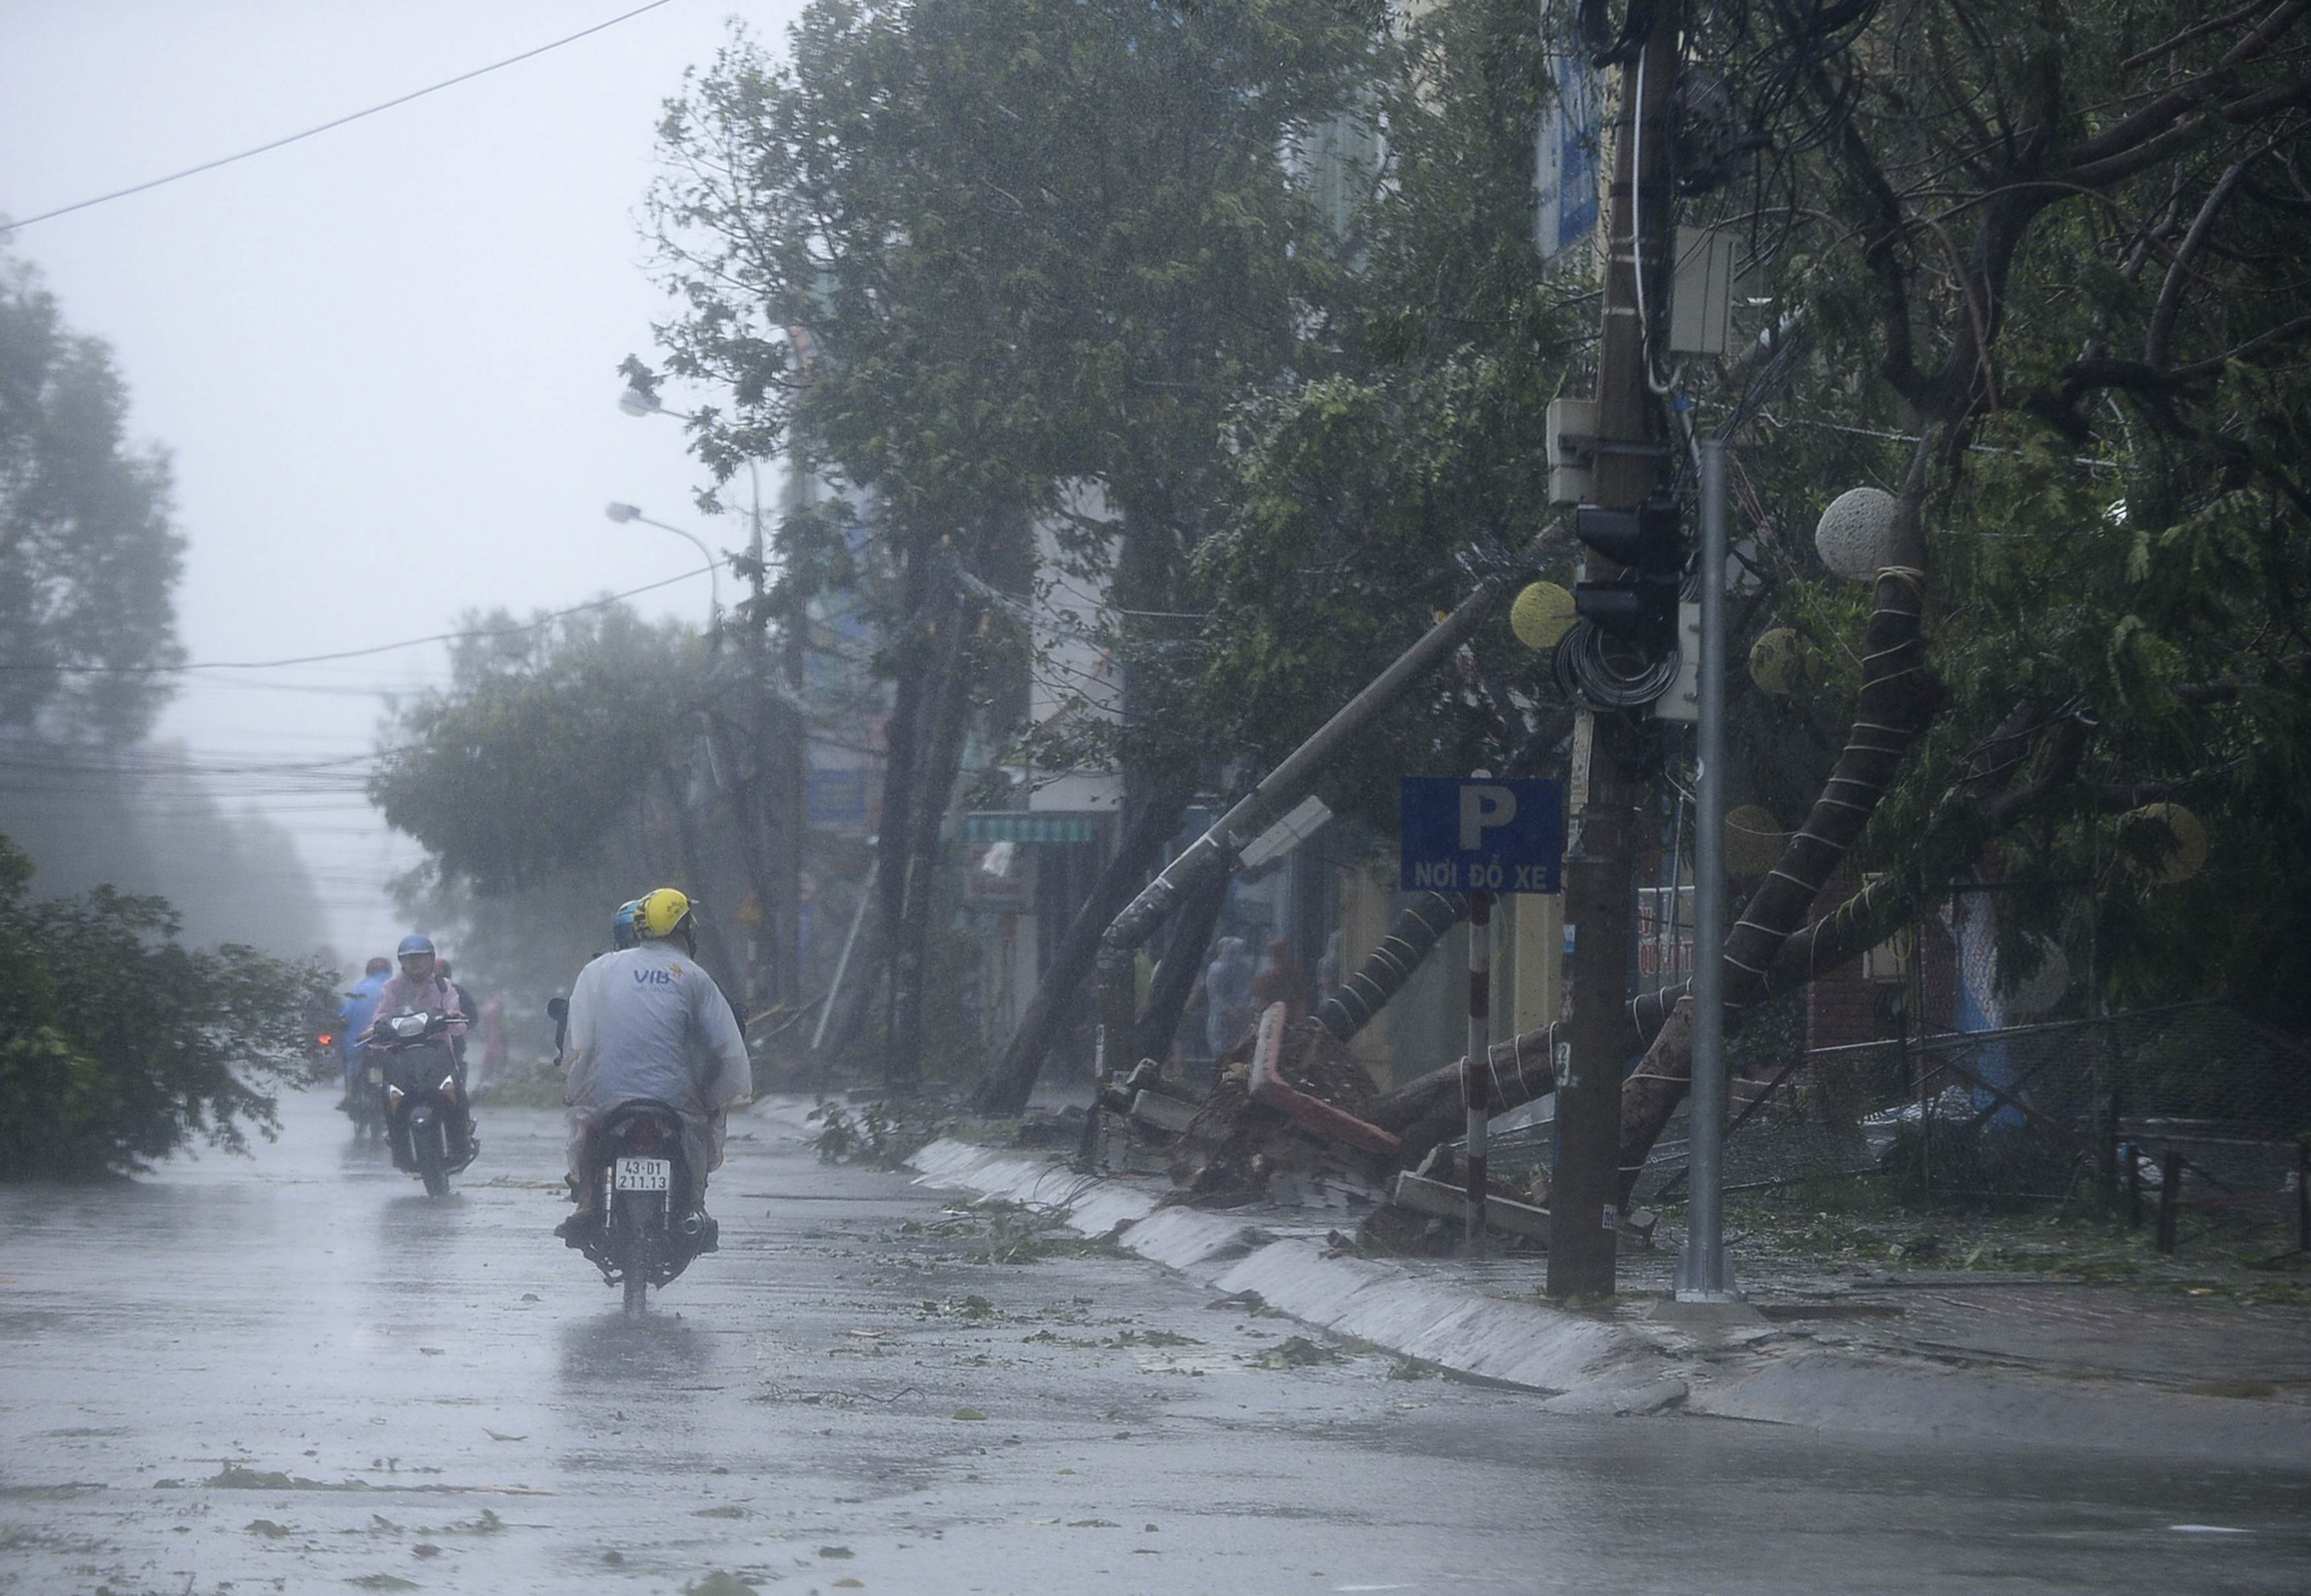 Motorcyclists ride past along fallen trees, caused by Typhoon Nari, along a street in Vietnam's central Danang city. Photo: Reuters